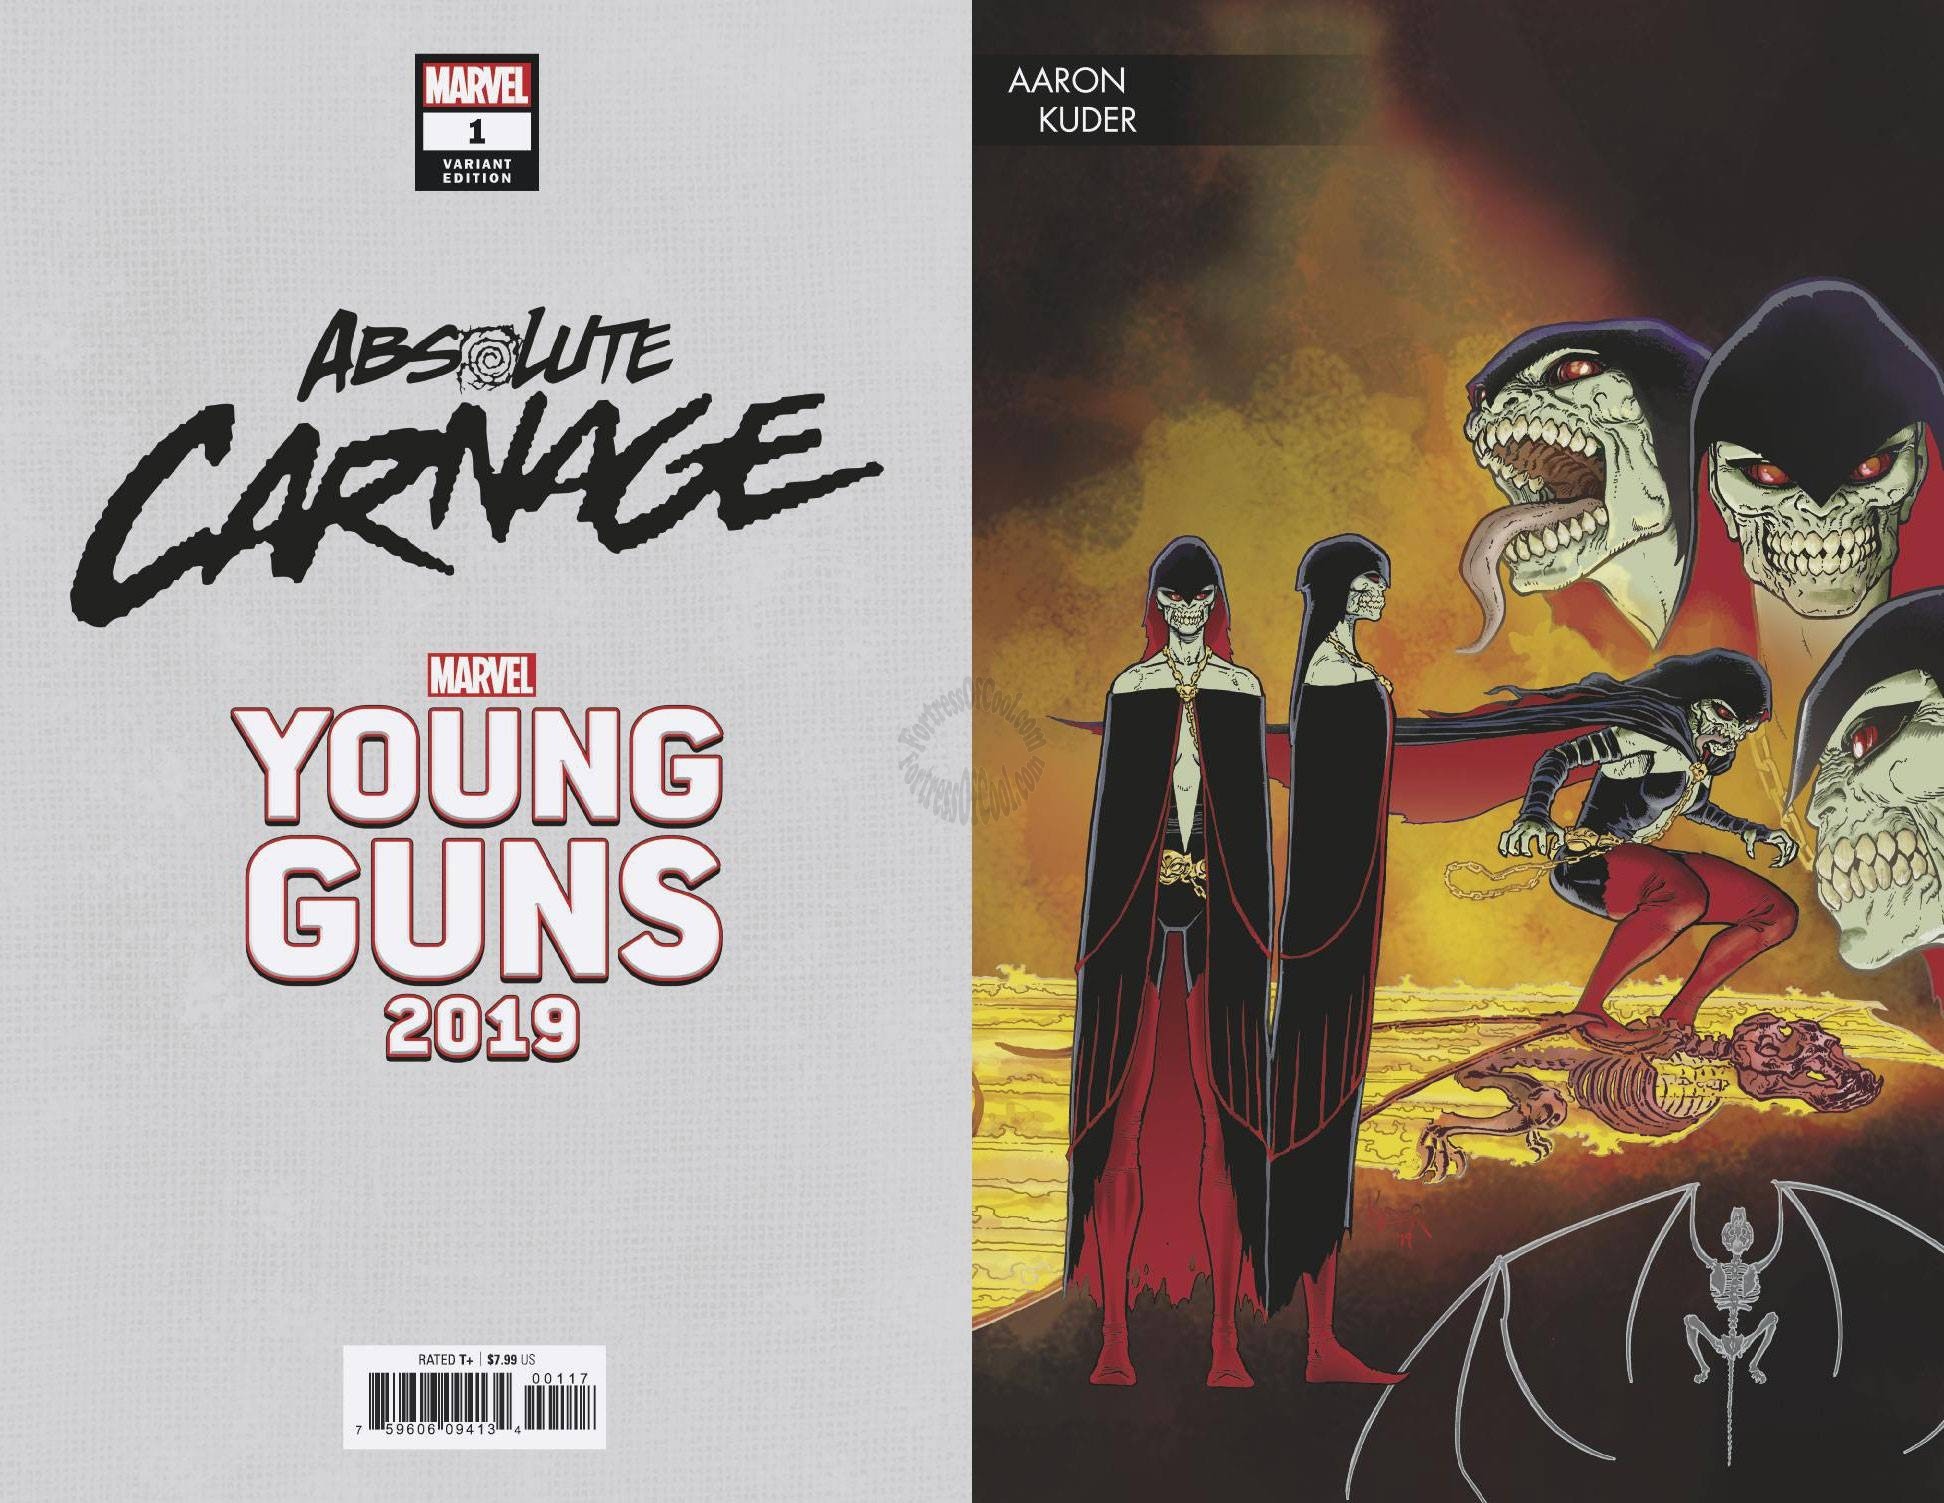 ABSOLUTE CARNAGE #1 (OF 5) KUDER YOUNG GUNS VARIANT